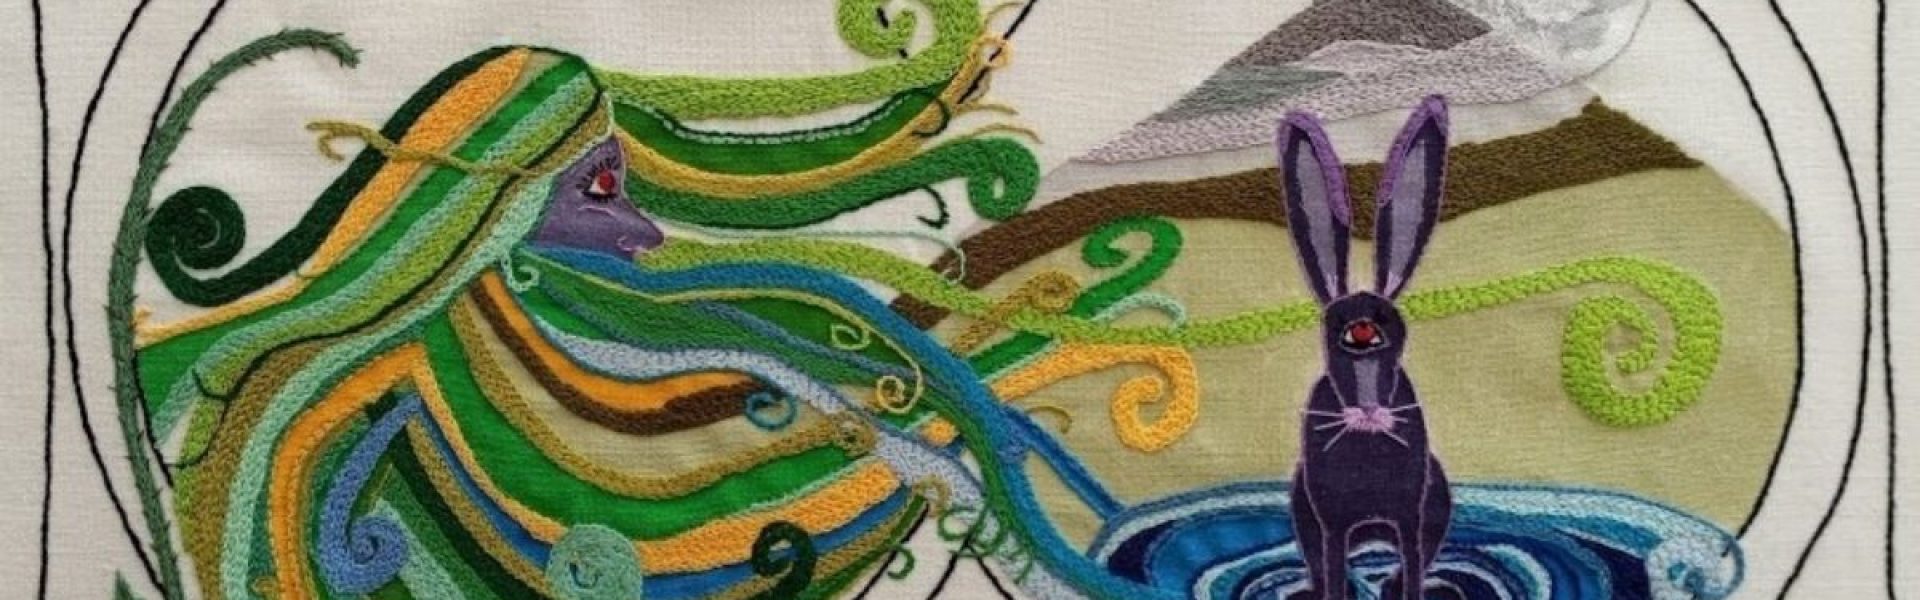 Stitch Journey by Sally-Ann-Duffy, Hand Embroidery graduate